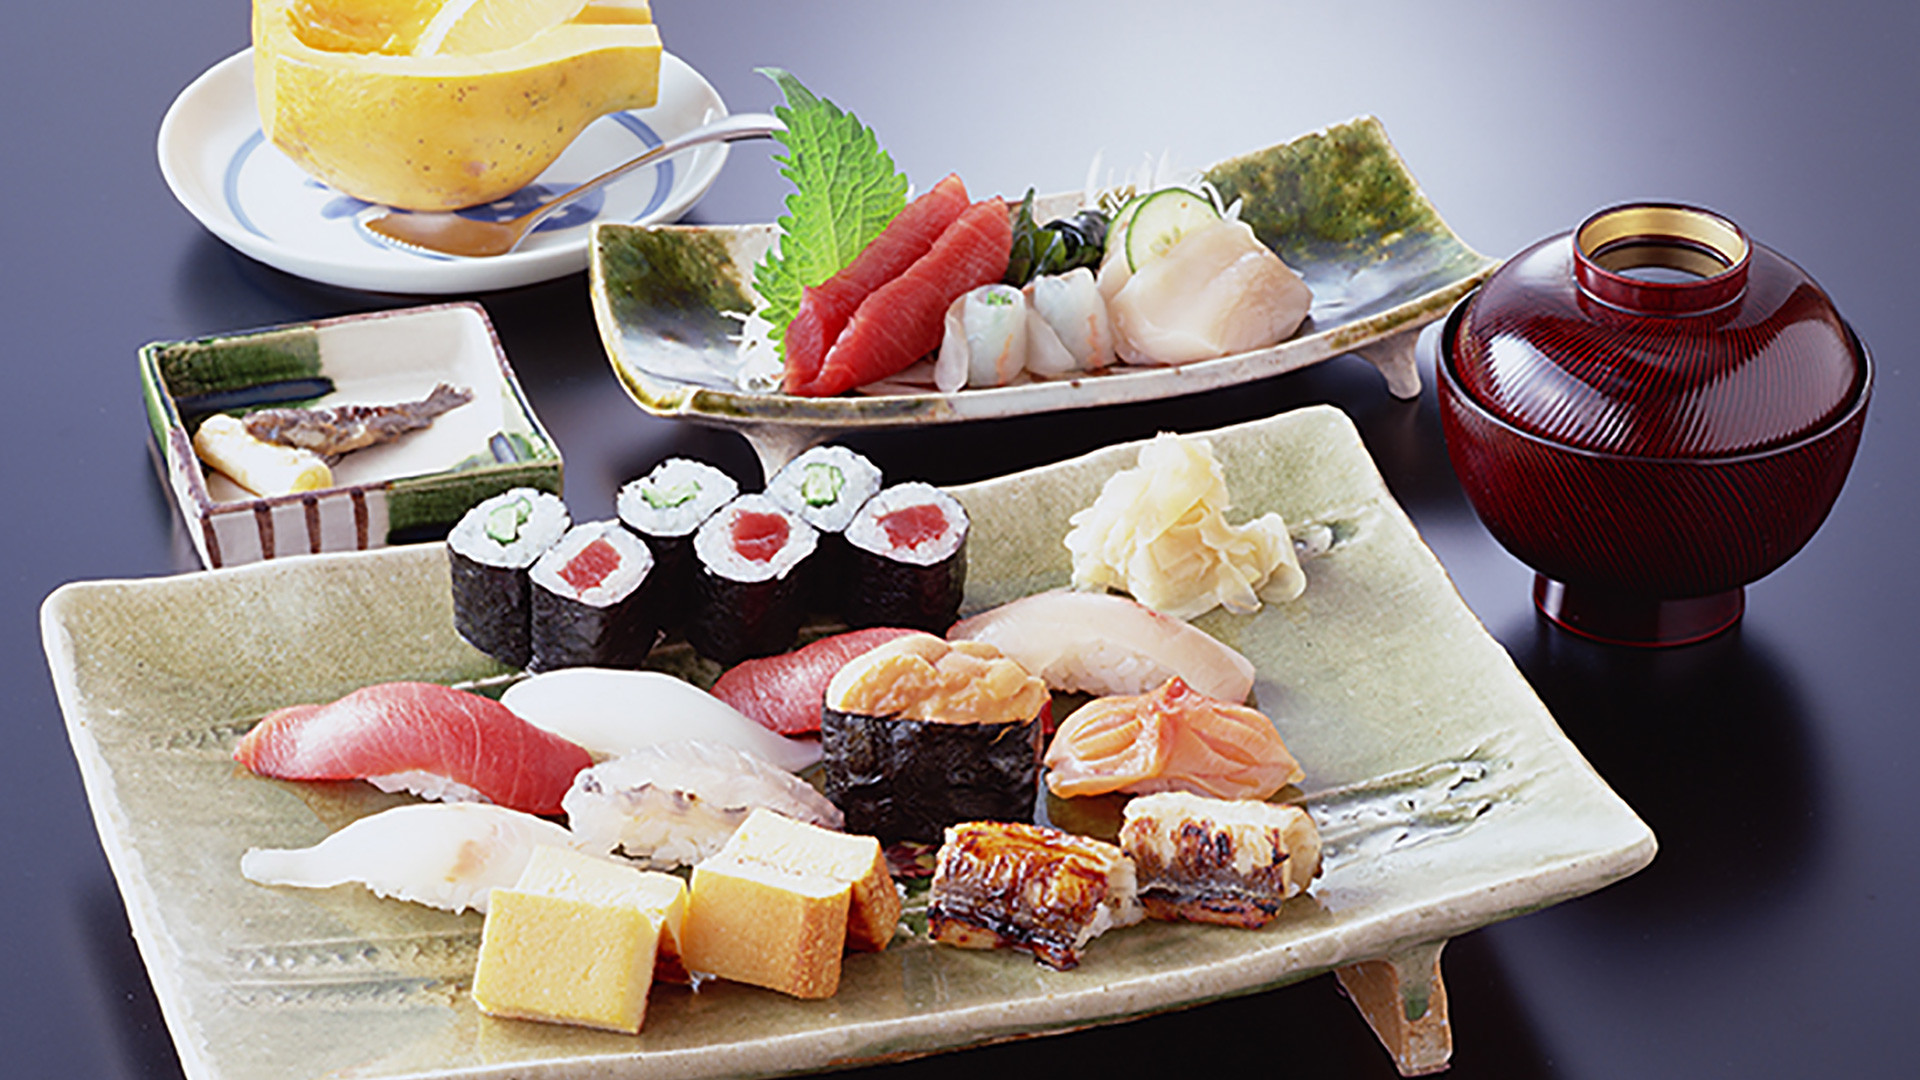 1920x1080 Highly acclaimed as one of the best sushi restaurants in Japan, Kyubey  offers an abundance of market-fresh seasonal fish delicately prepared with  small ...